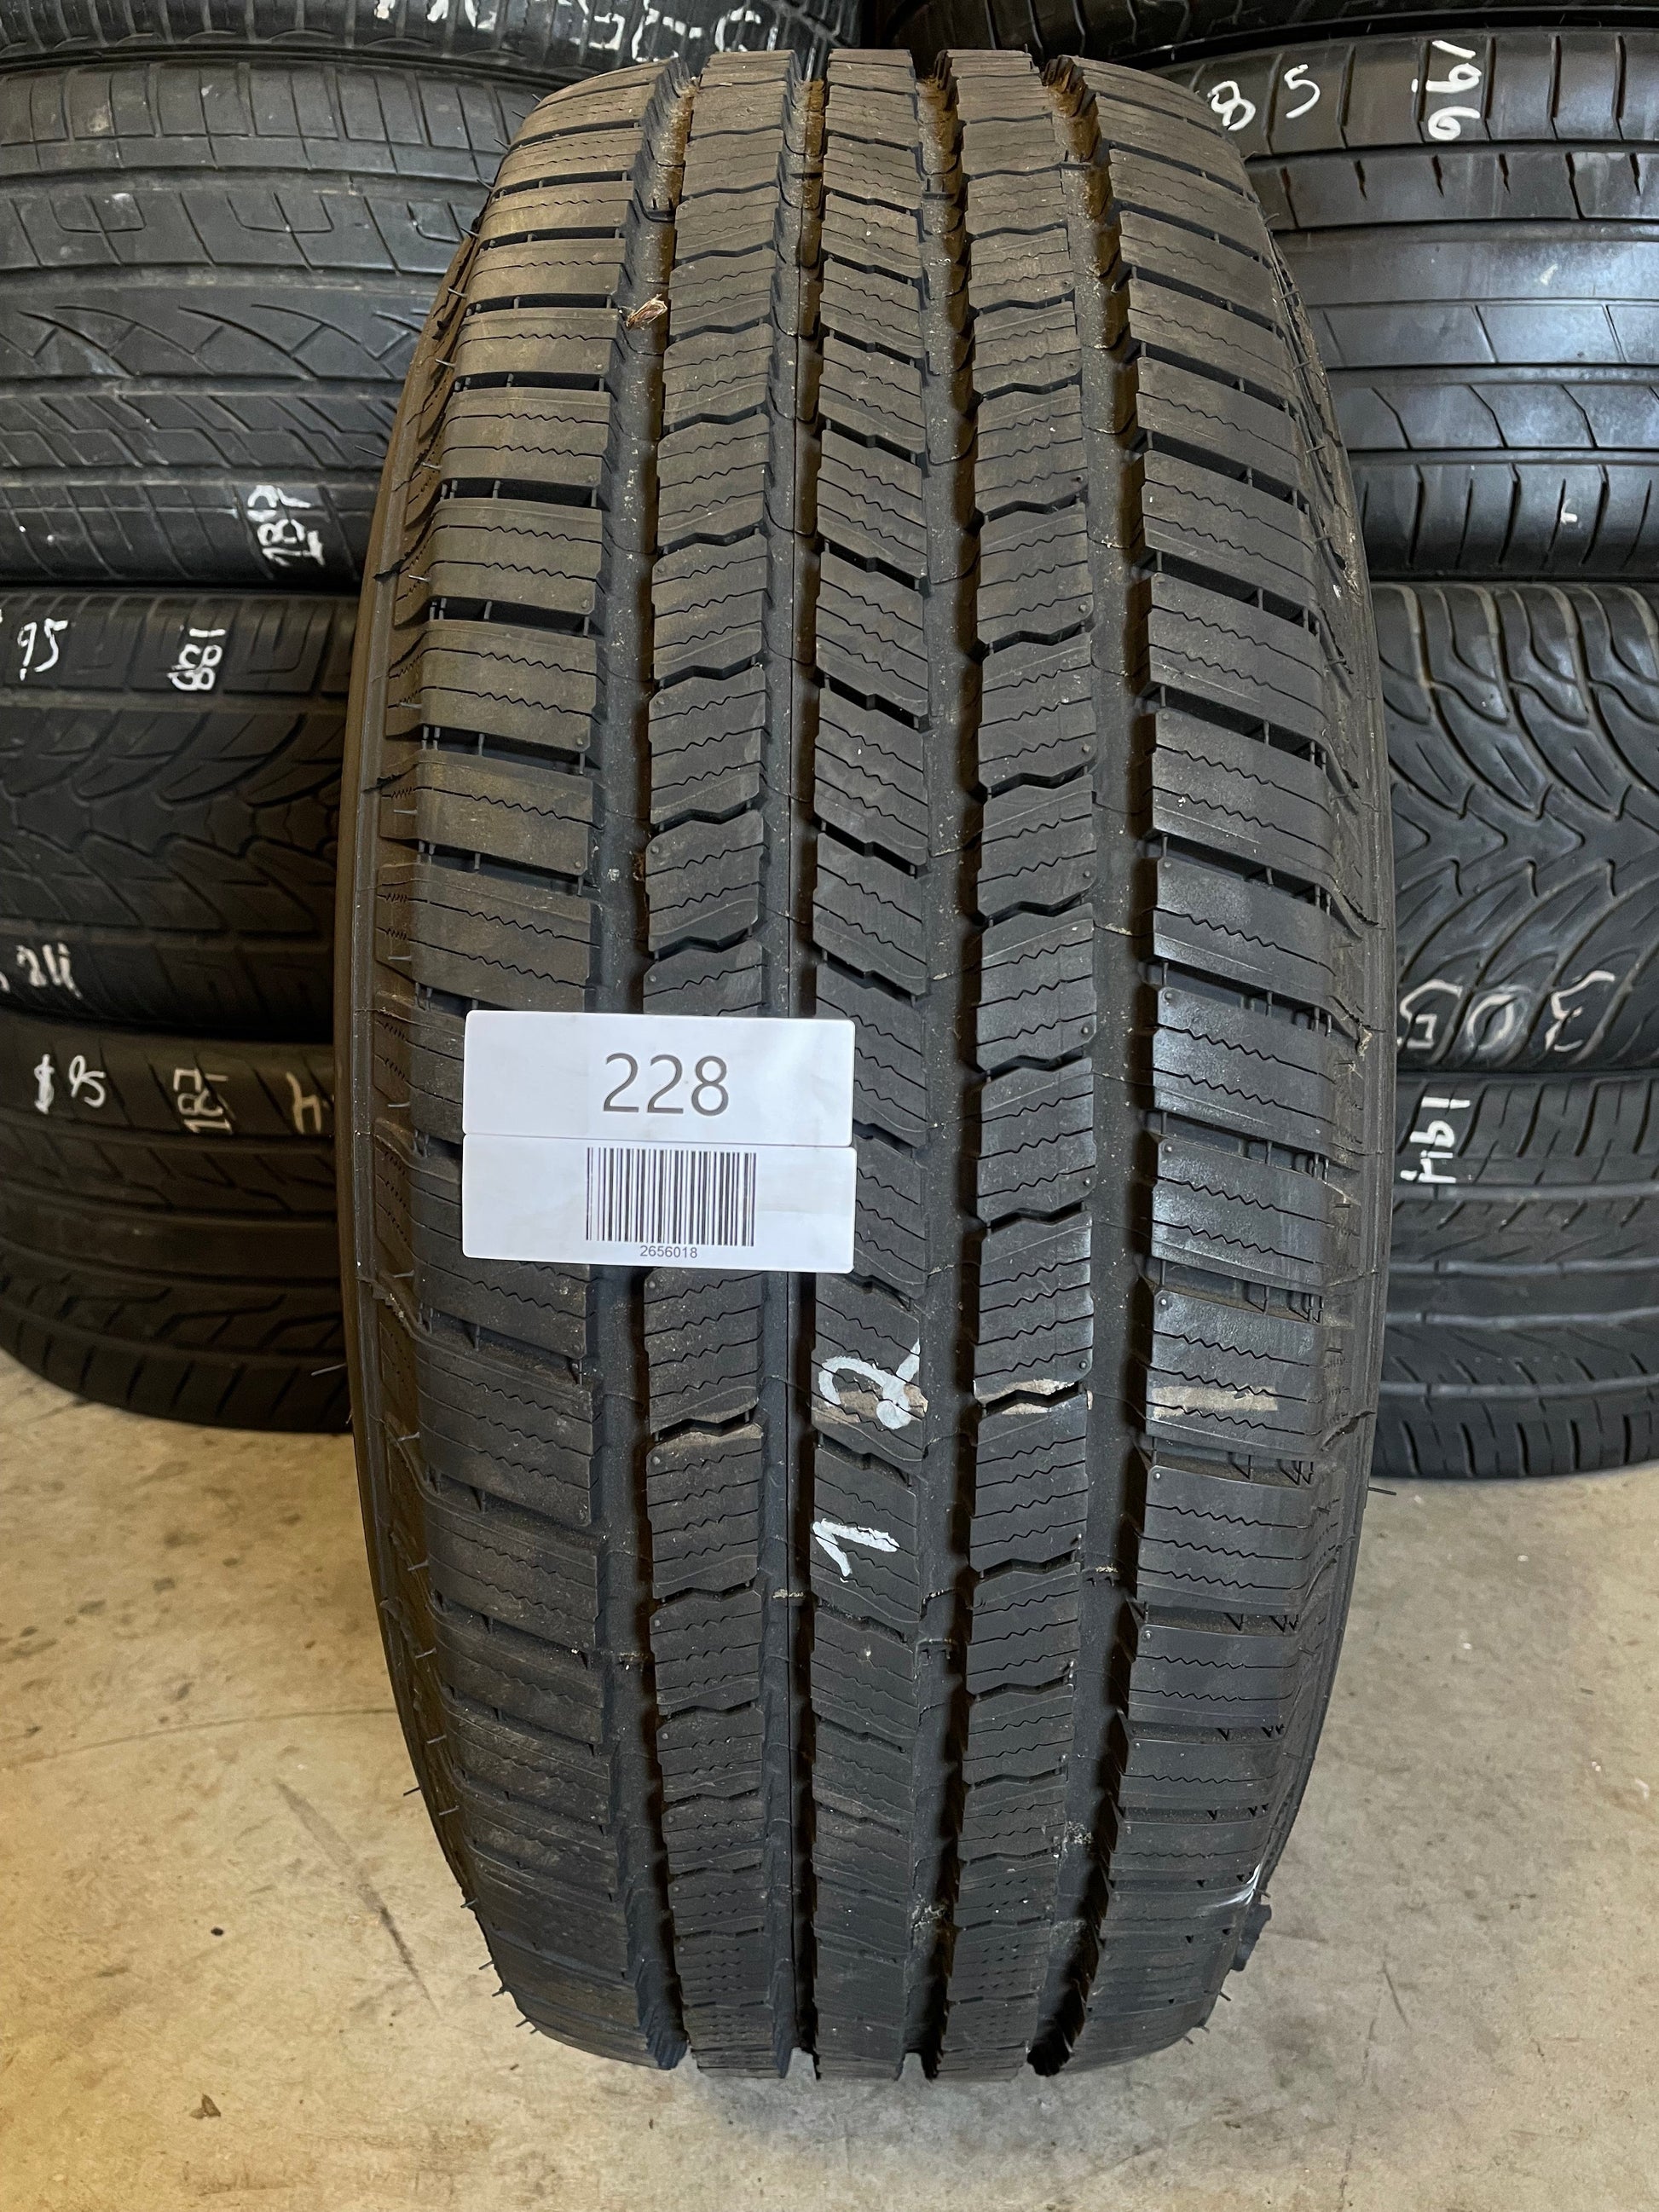 SET OF 4 265/60R18 Michelin Defender LTX M/S 110 T XL - Used Tires